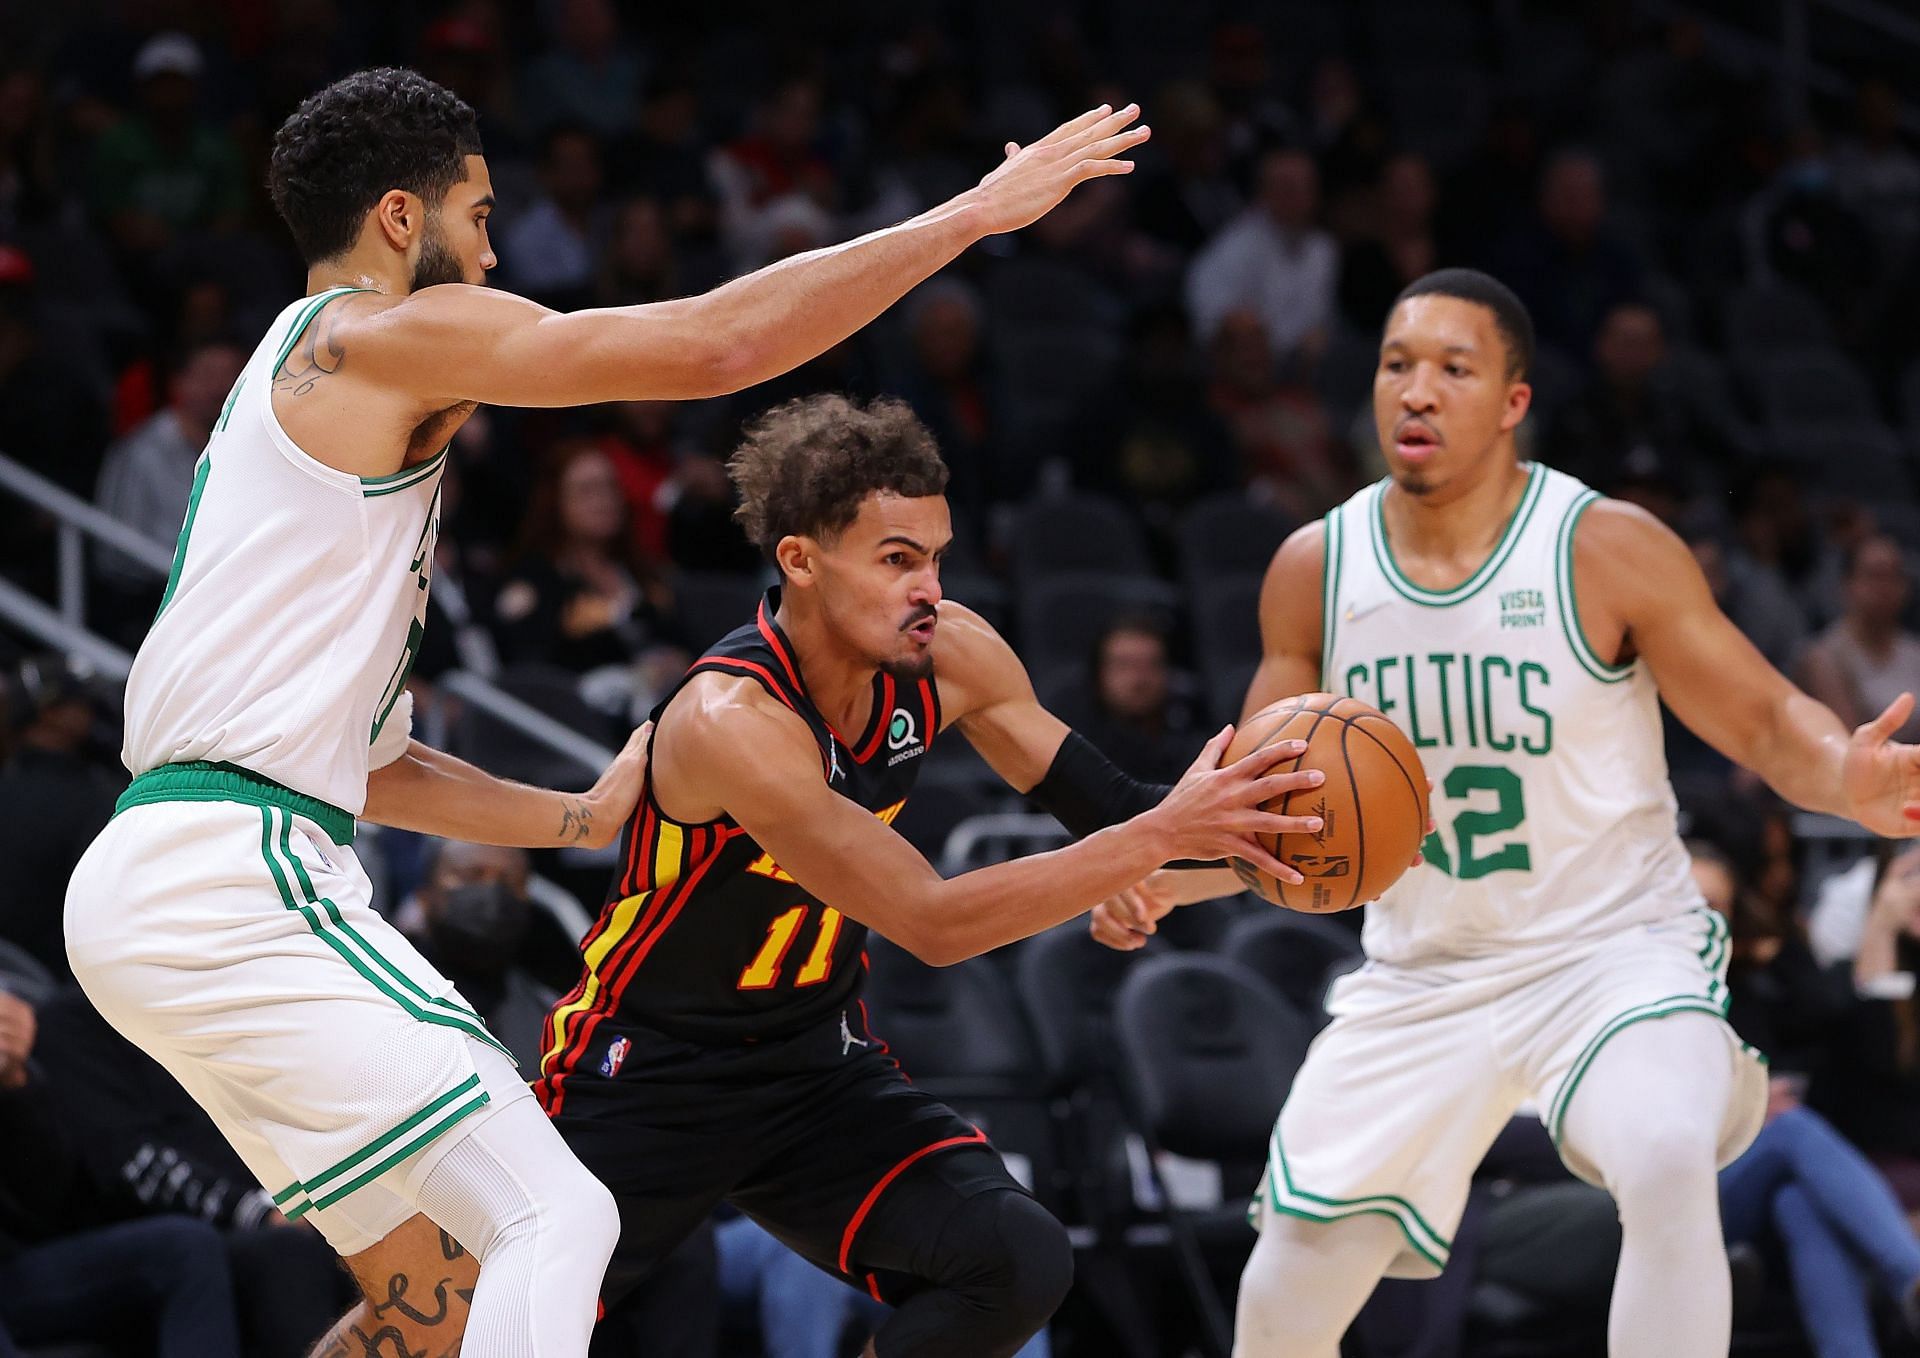 The Celtics and the Hawks will face off at TD Garden on Tuesday evening